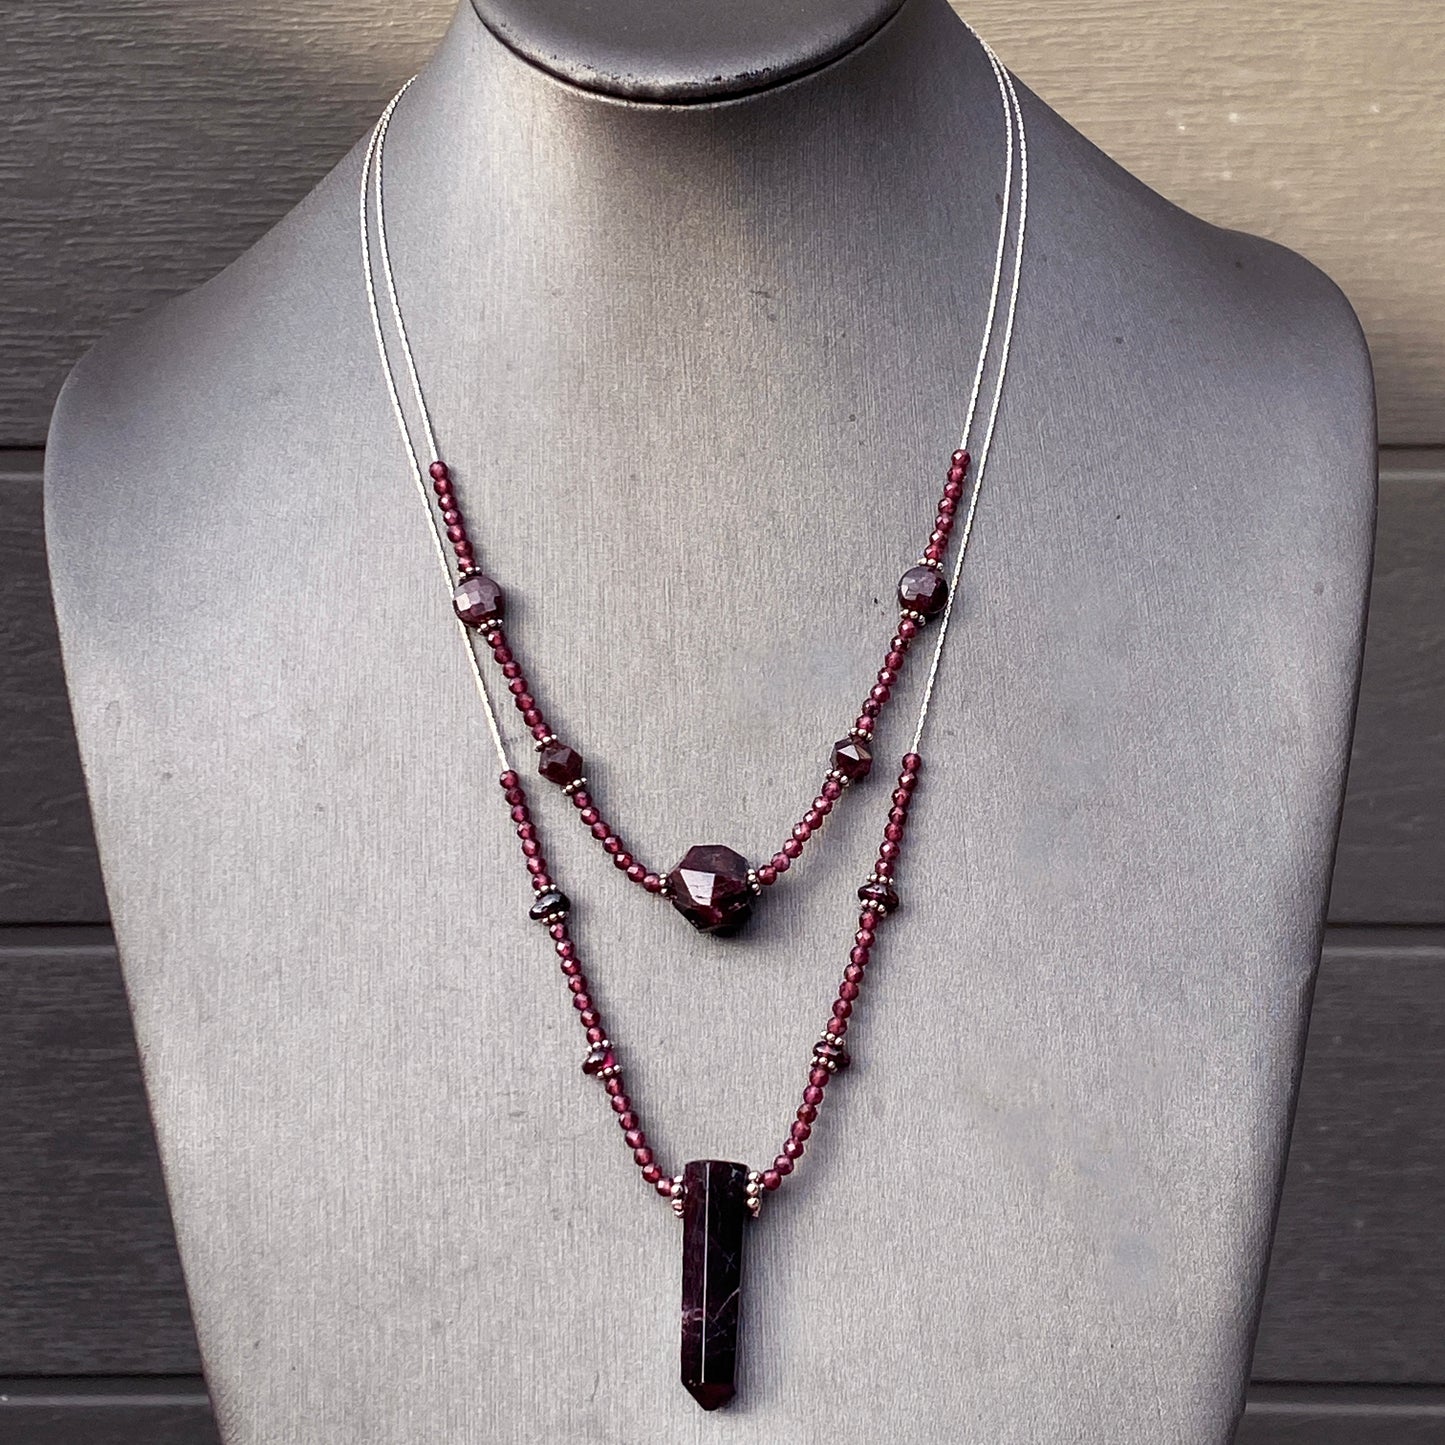 Garnet gemstones with sterling silver double strand necklace.